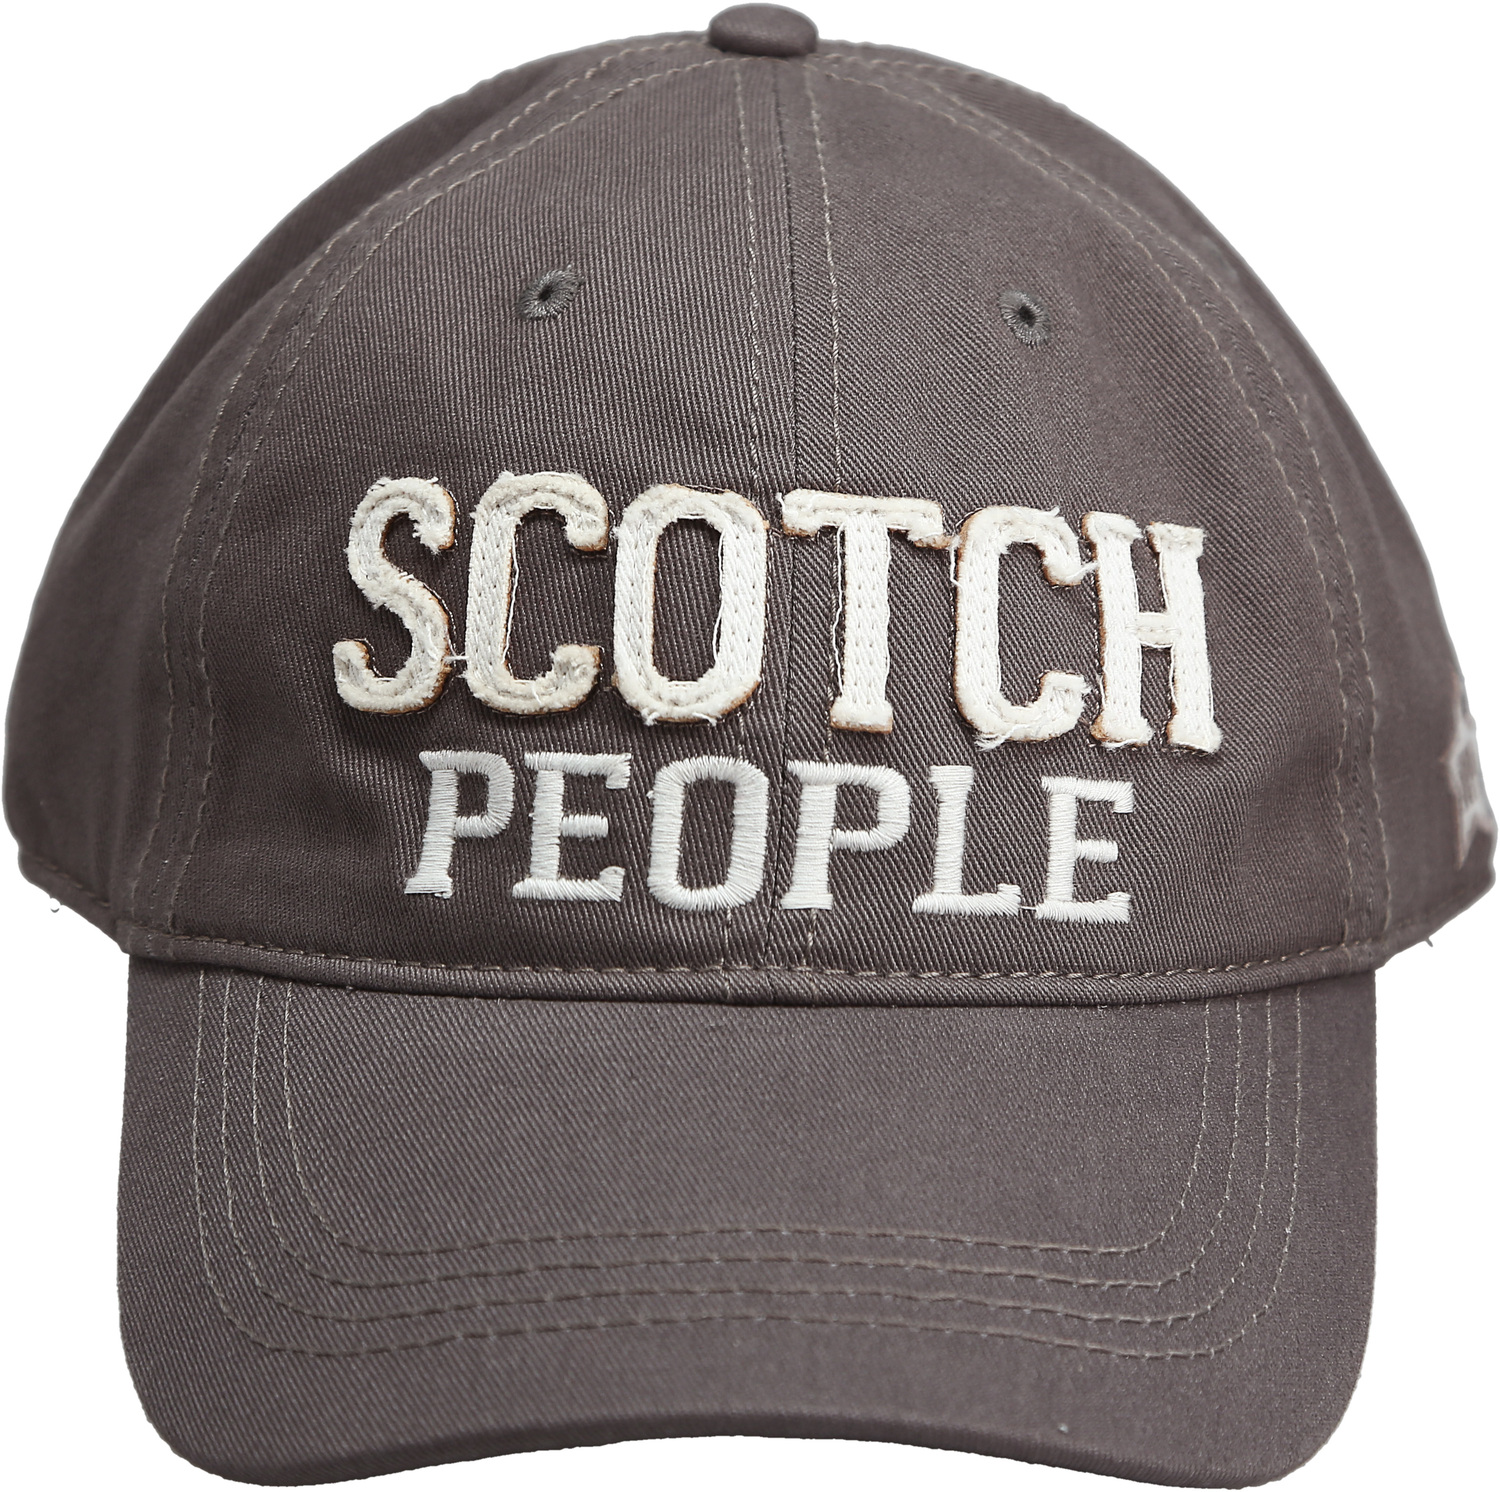 Scotch People by We People - Scotch People - Dark Gray Adjustable Hat